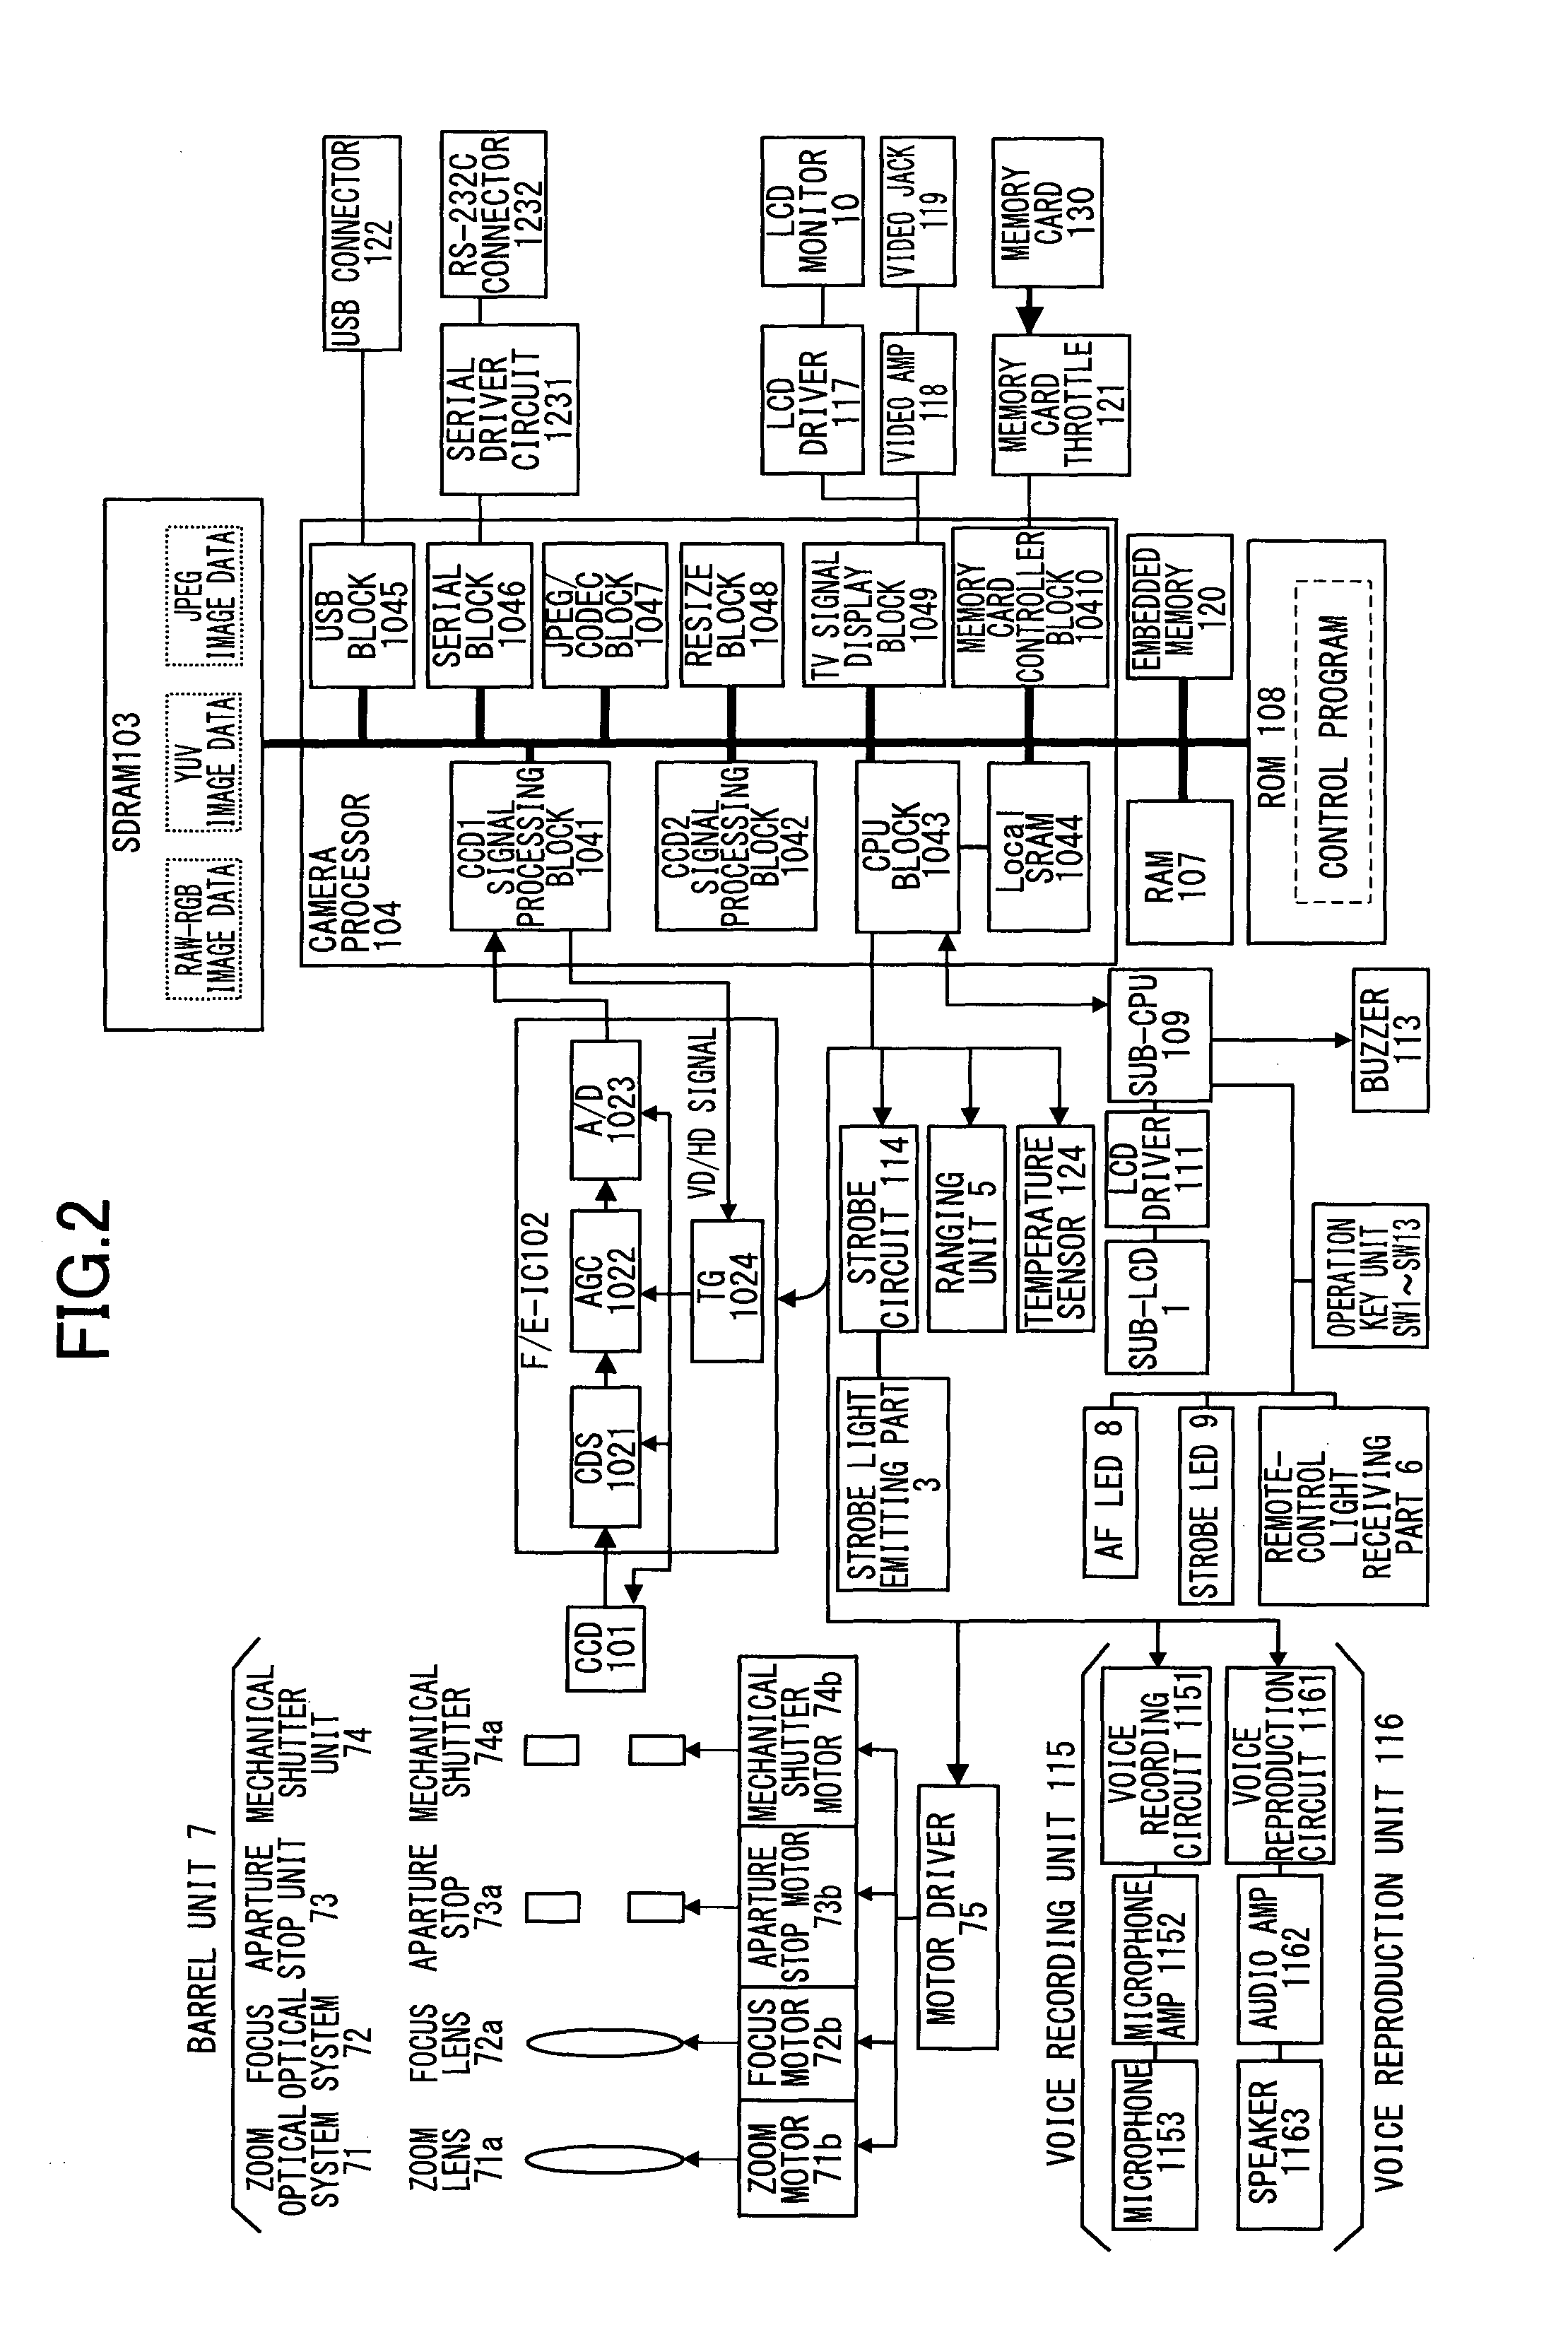 Image processor performing noise reduction processing, imaging apparatus equipped with the same, and image processing method for performing noise reduction processing